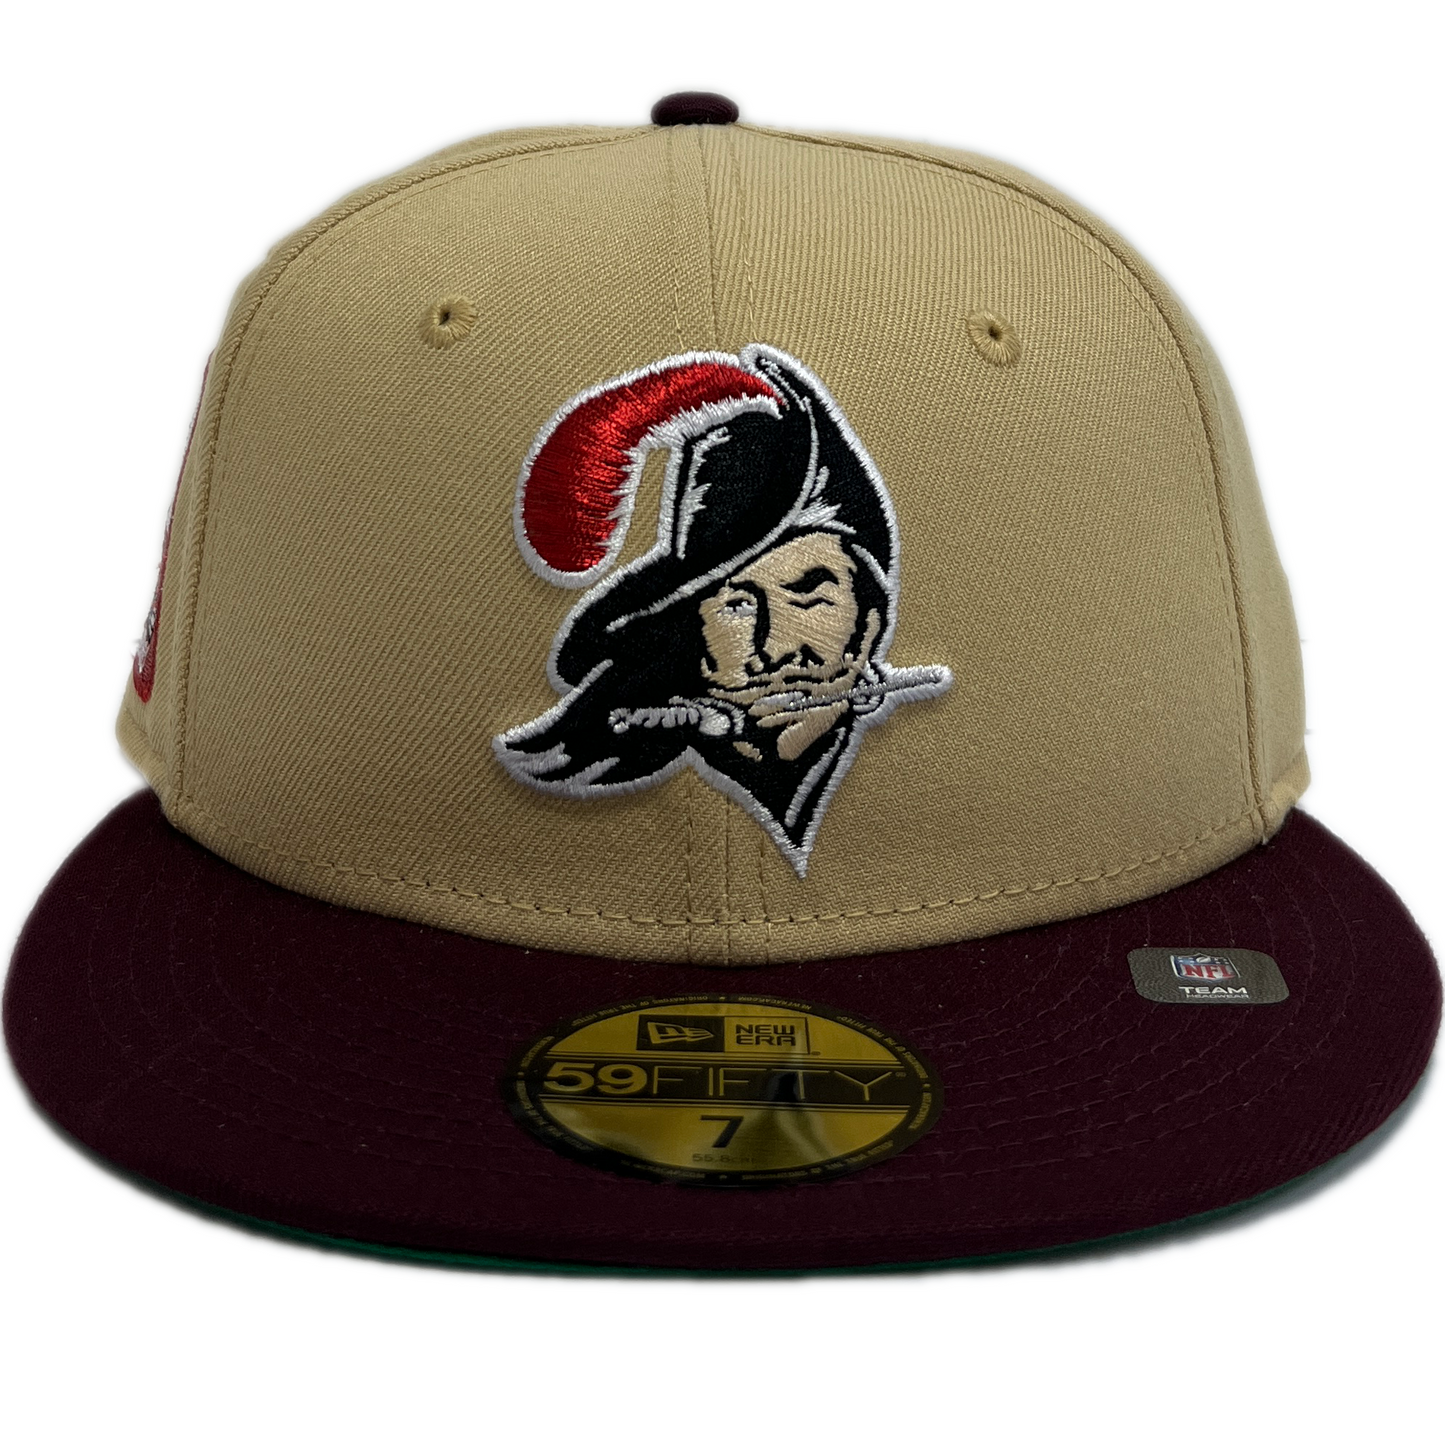 New Era Tampa Bay Buccaneers 59Fifty Fitted Hat - Cream/ Maroon